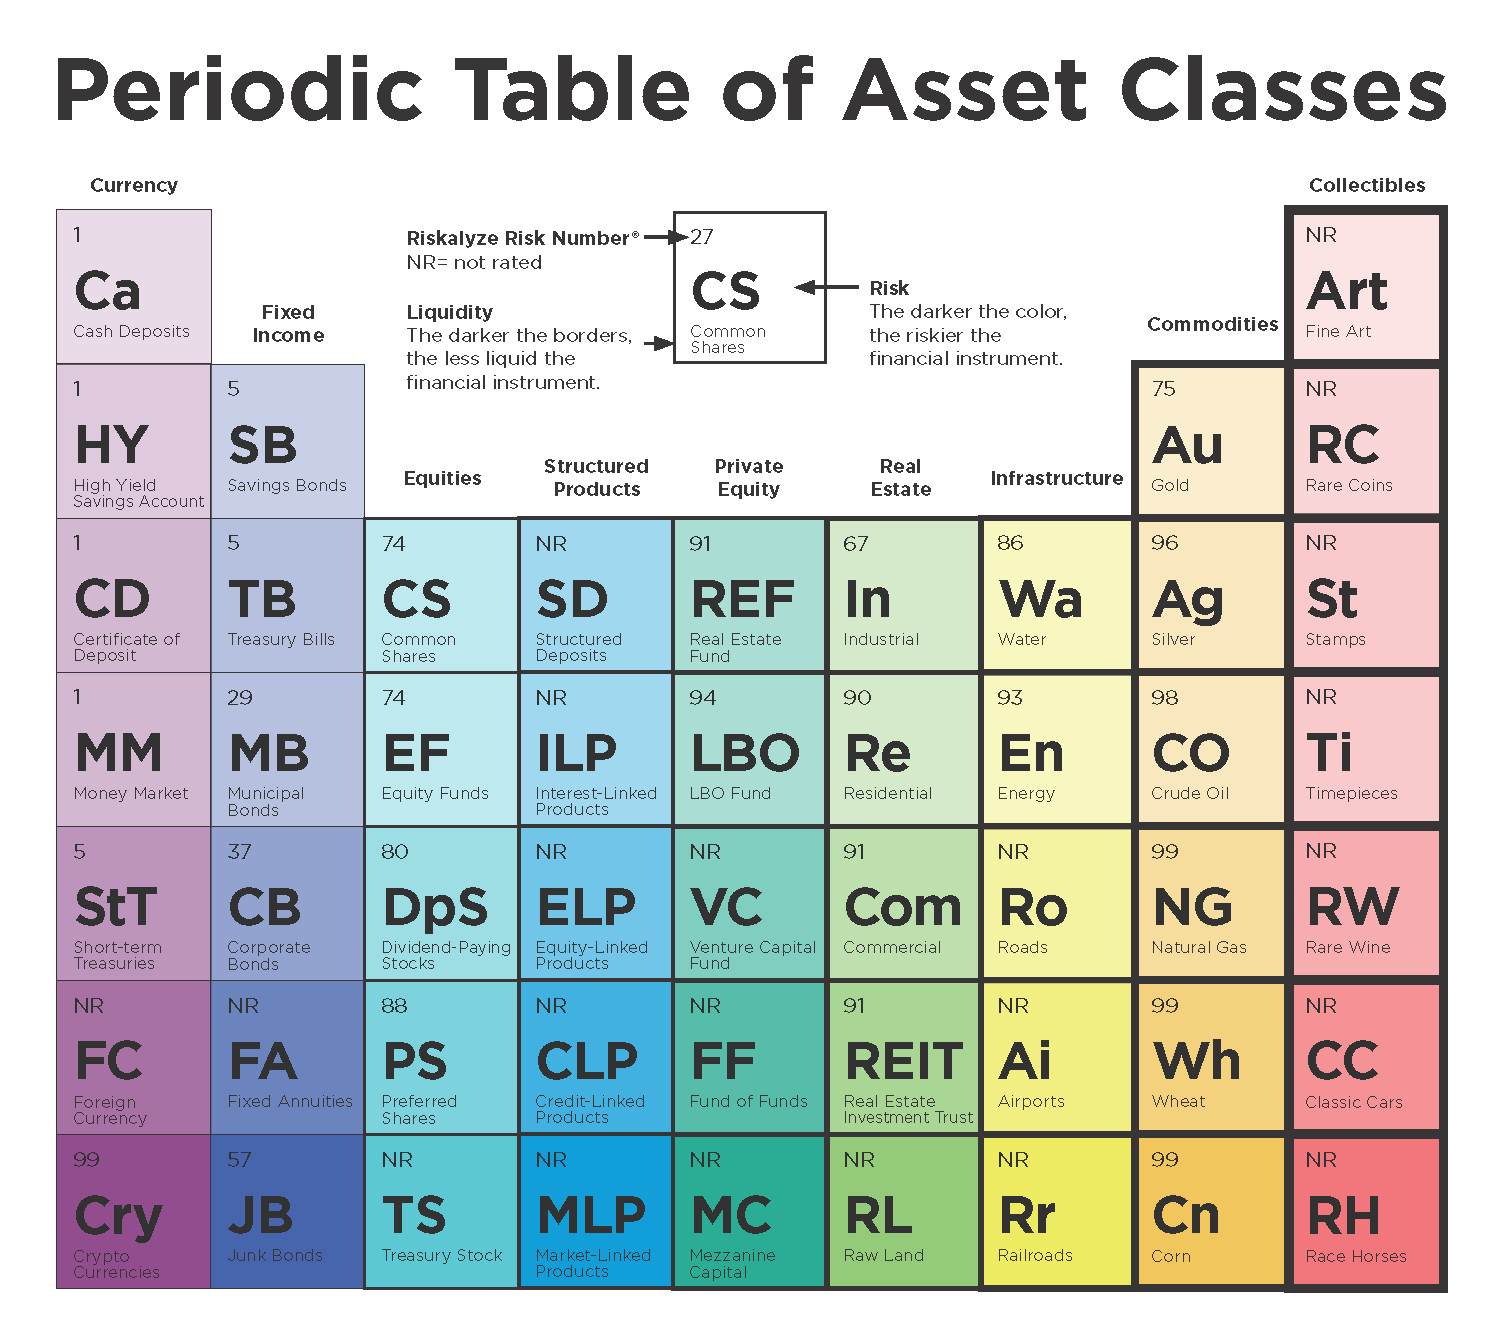 The Periodic Table of Asset Classes